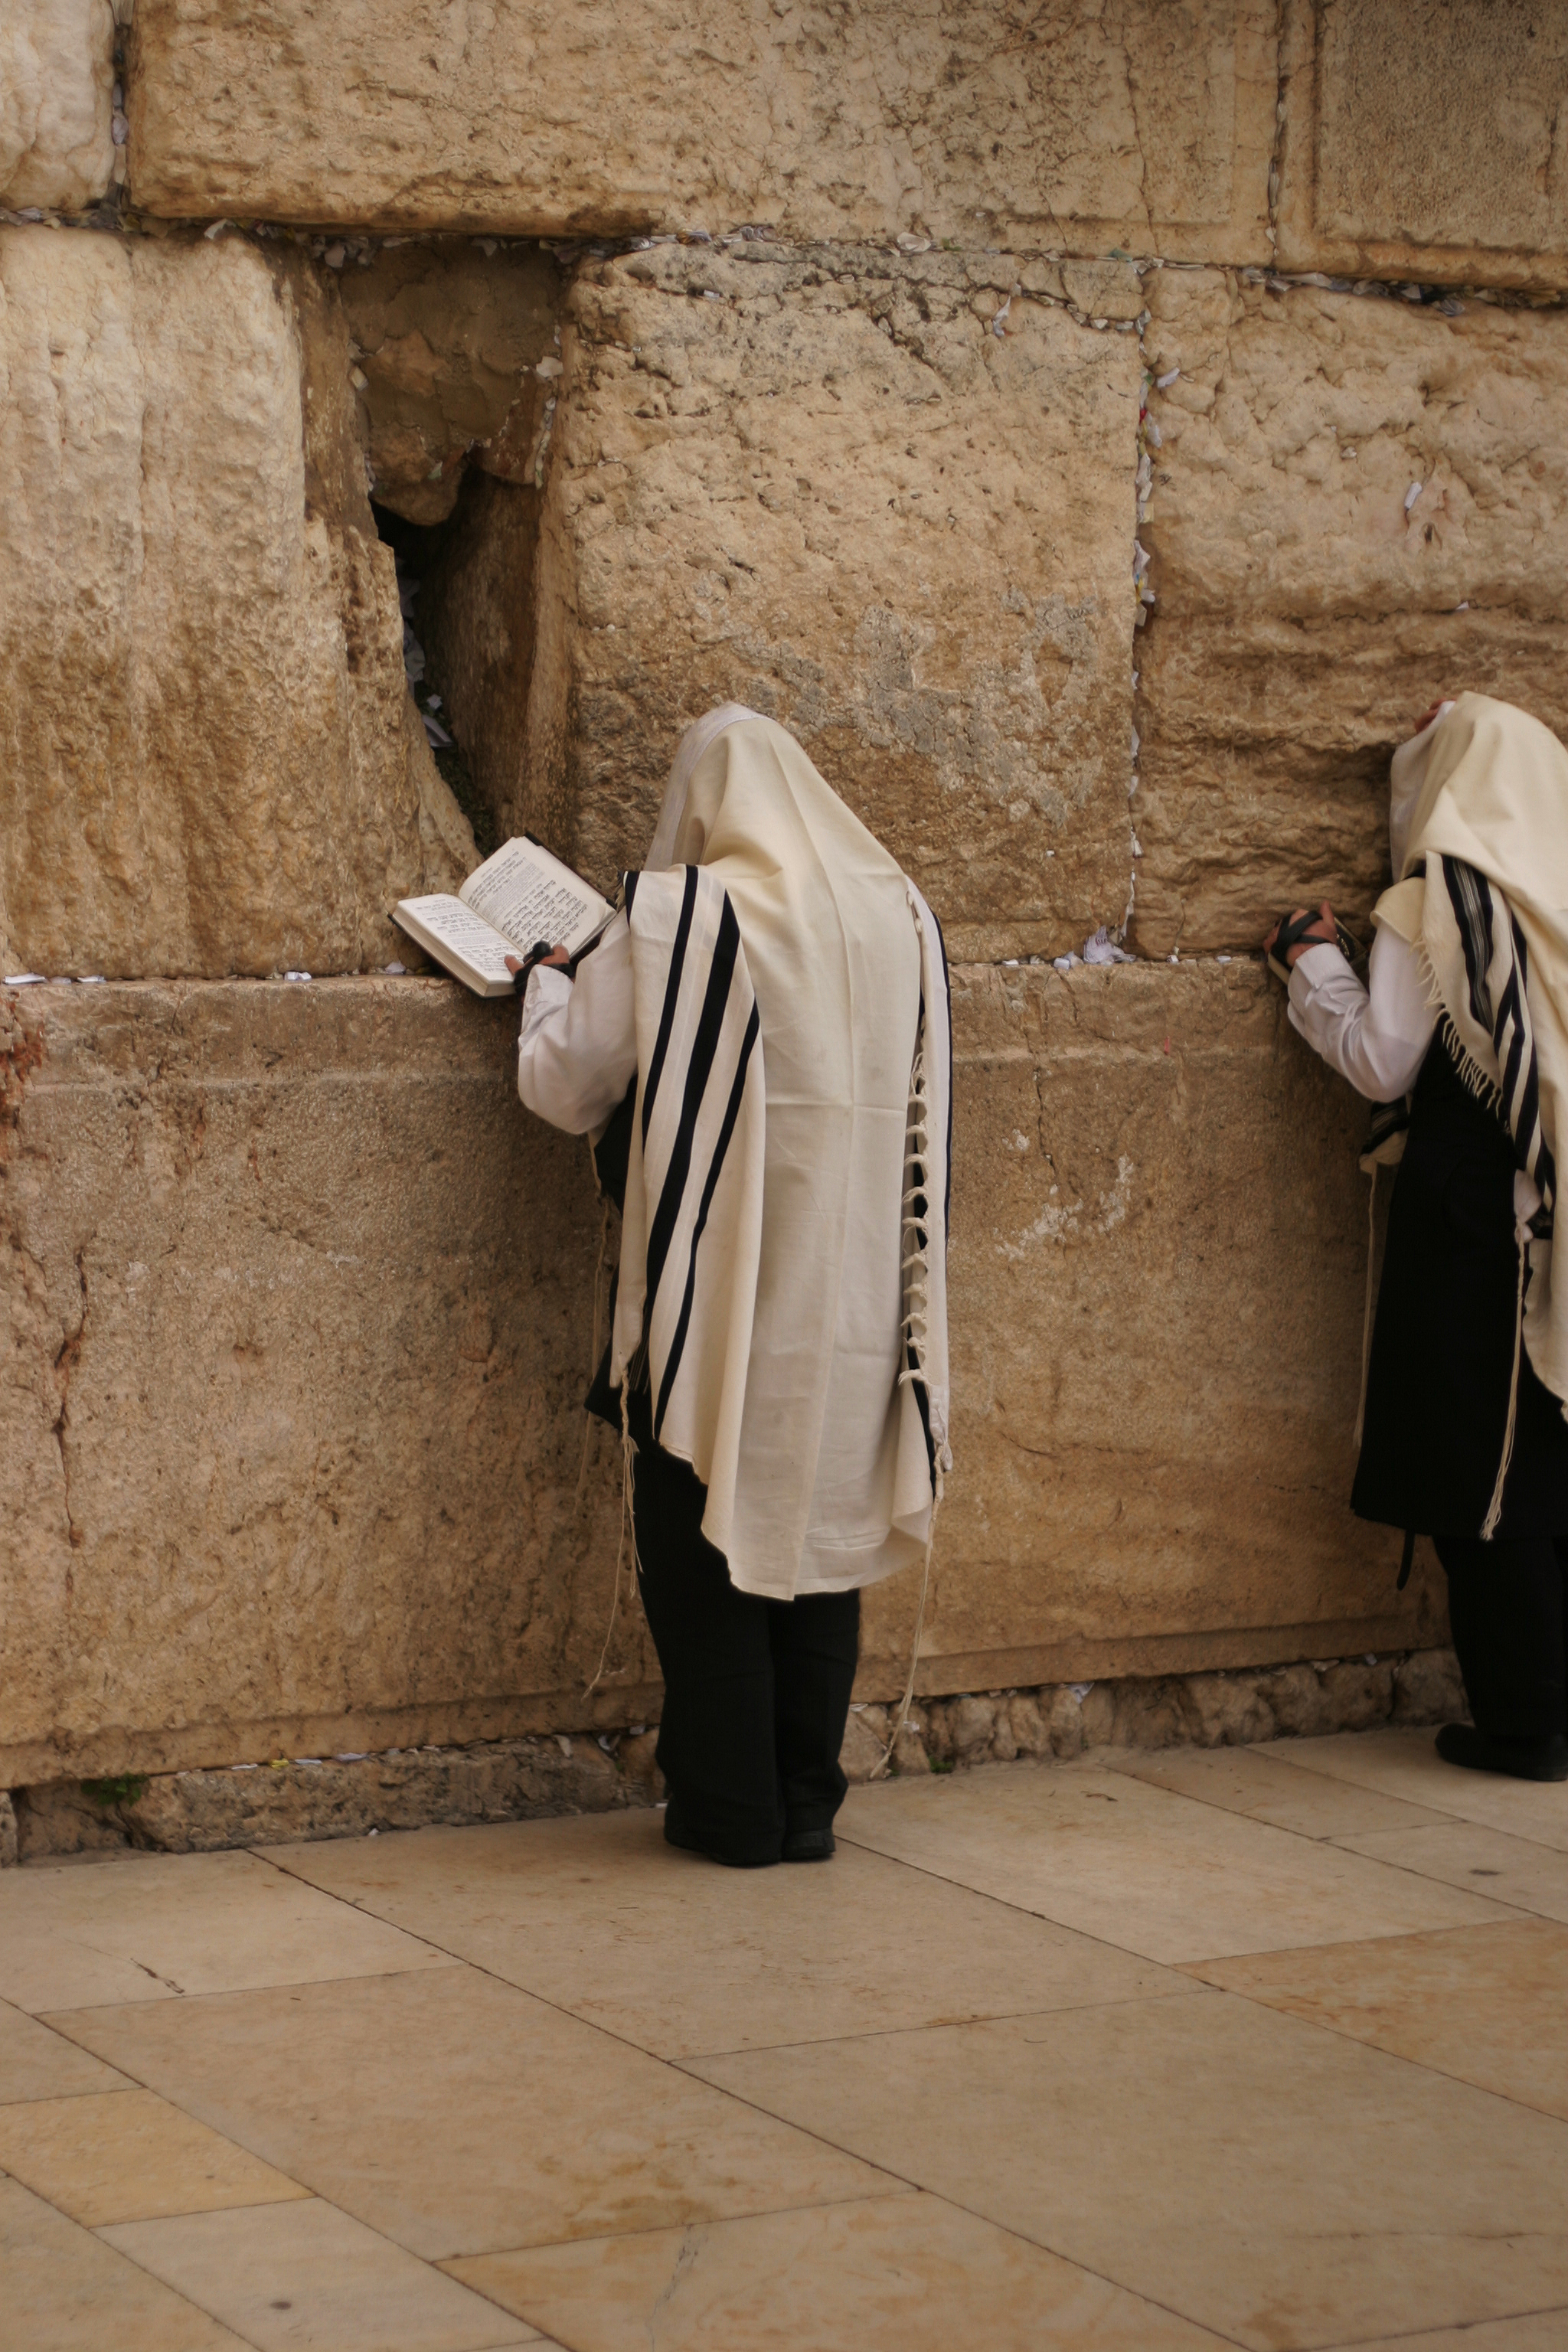 Mesmerizing photos of the Western Wall or 'Wailing Wall ...
